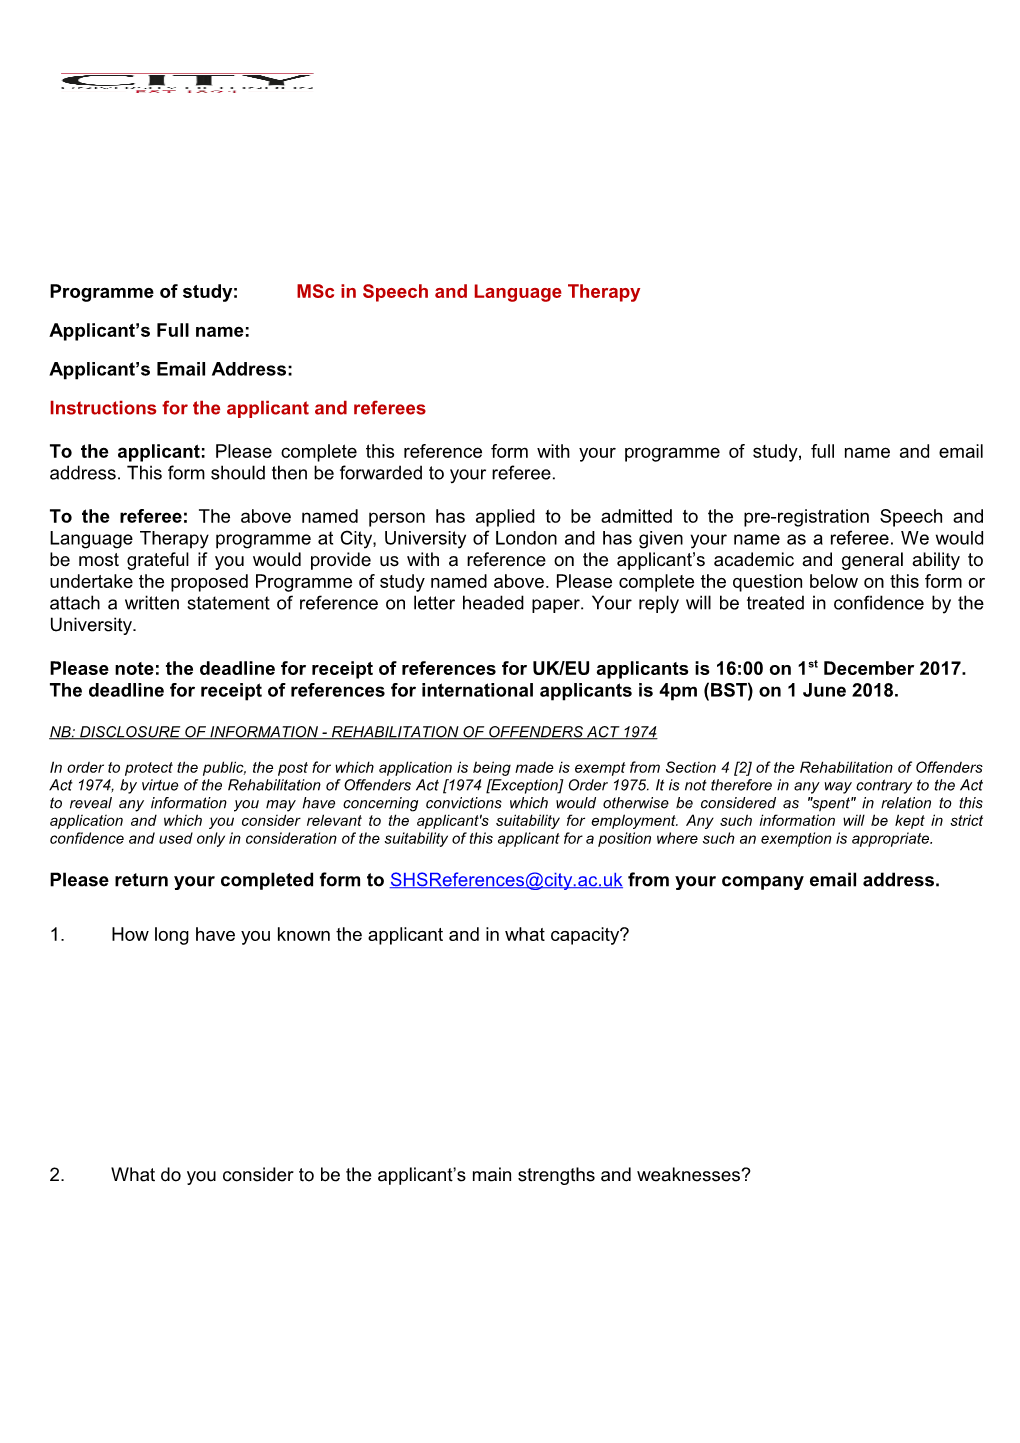 Programme of Study: Msc in Speech and Language Therapy